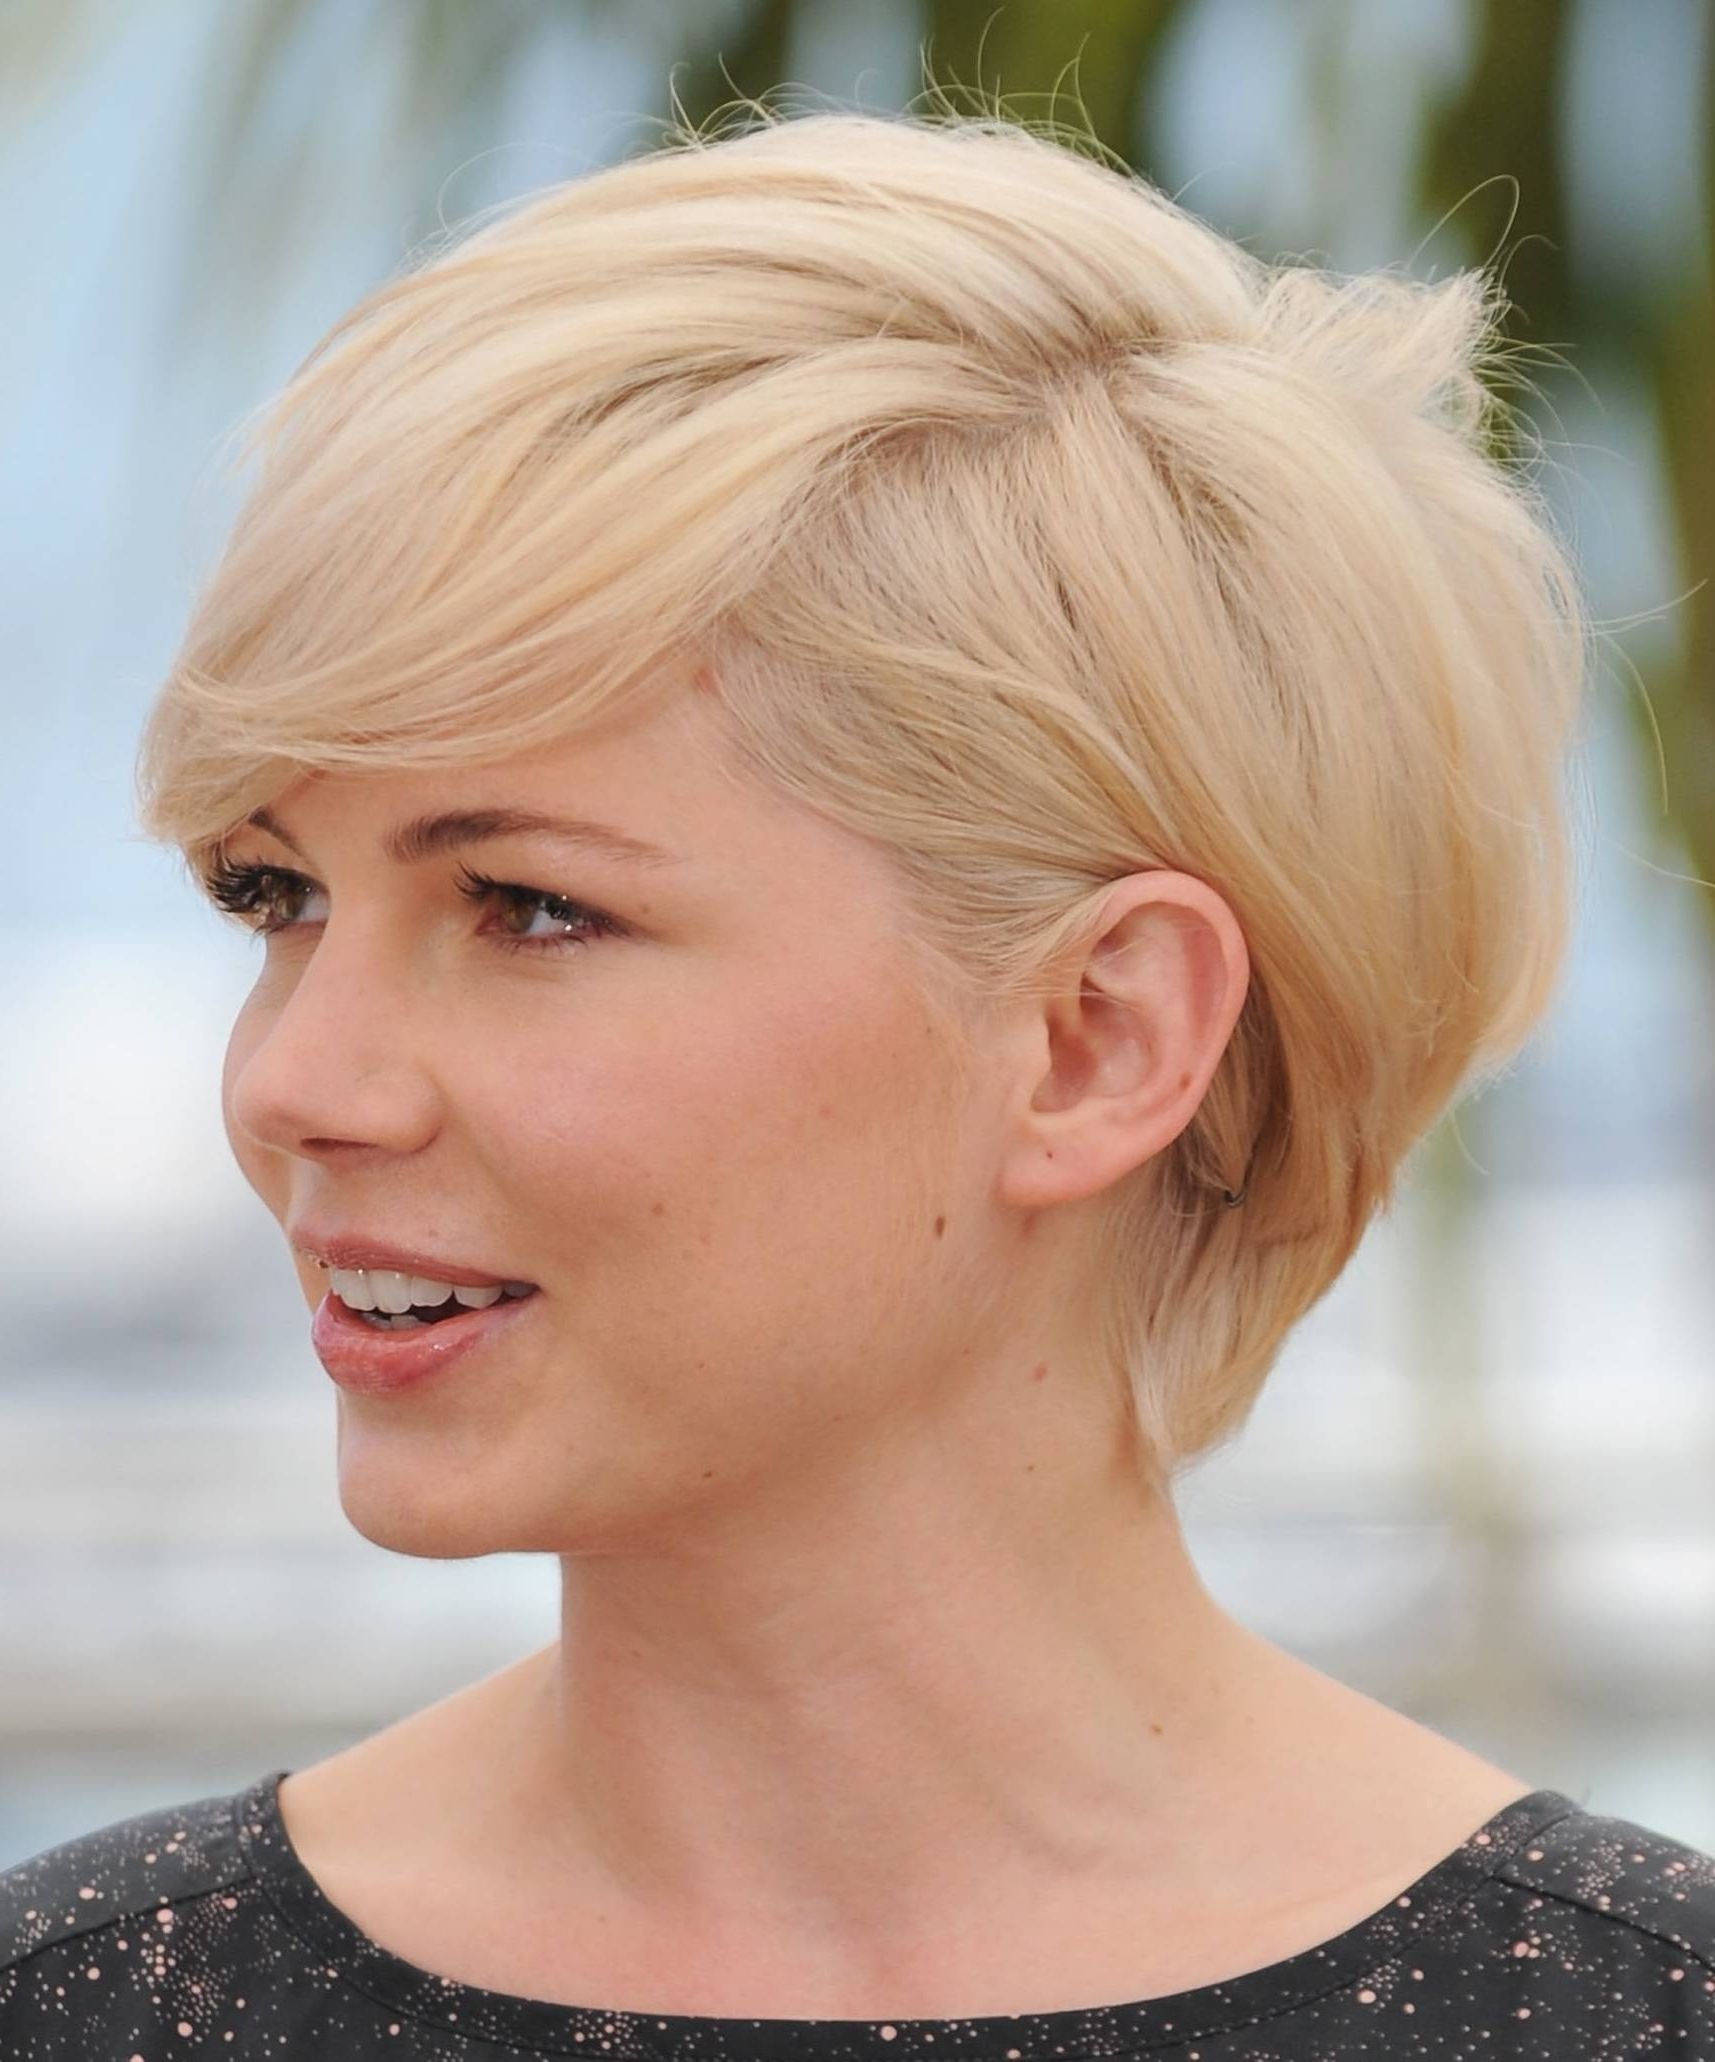 Celebrity Short Hairstyles For Women | Trend Hairstyle And Haircut In Most Current Celebrities Pixie Hairstyles (View 3 of 15)